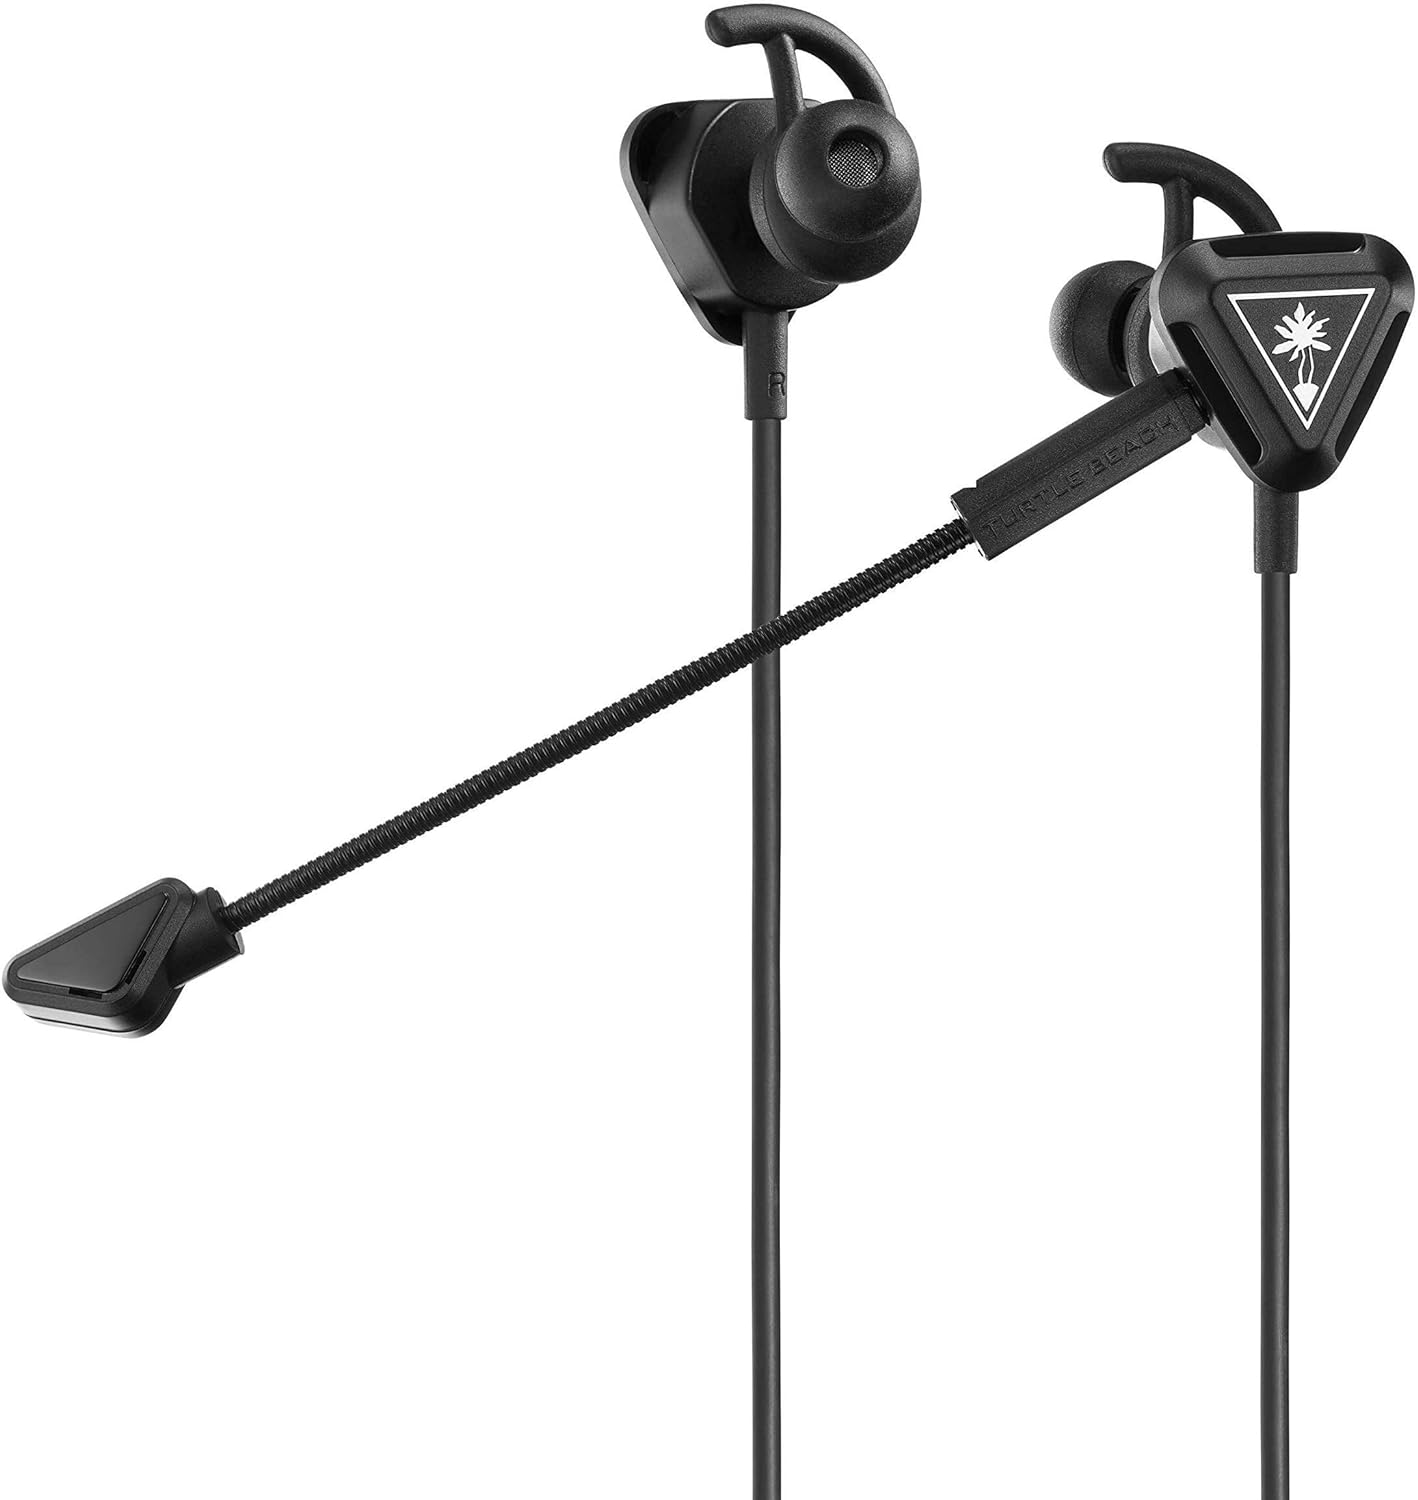 Turtle Beach Battle Buds In-Ear Gaming Headset for Mobile & PC with 3.5mm, Xbox Series X/ S, Xbox One, PS5, PS4, PlayStation, Switch – Lightweight, In-Line Controls – Black/Silver